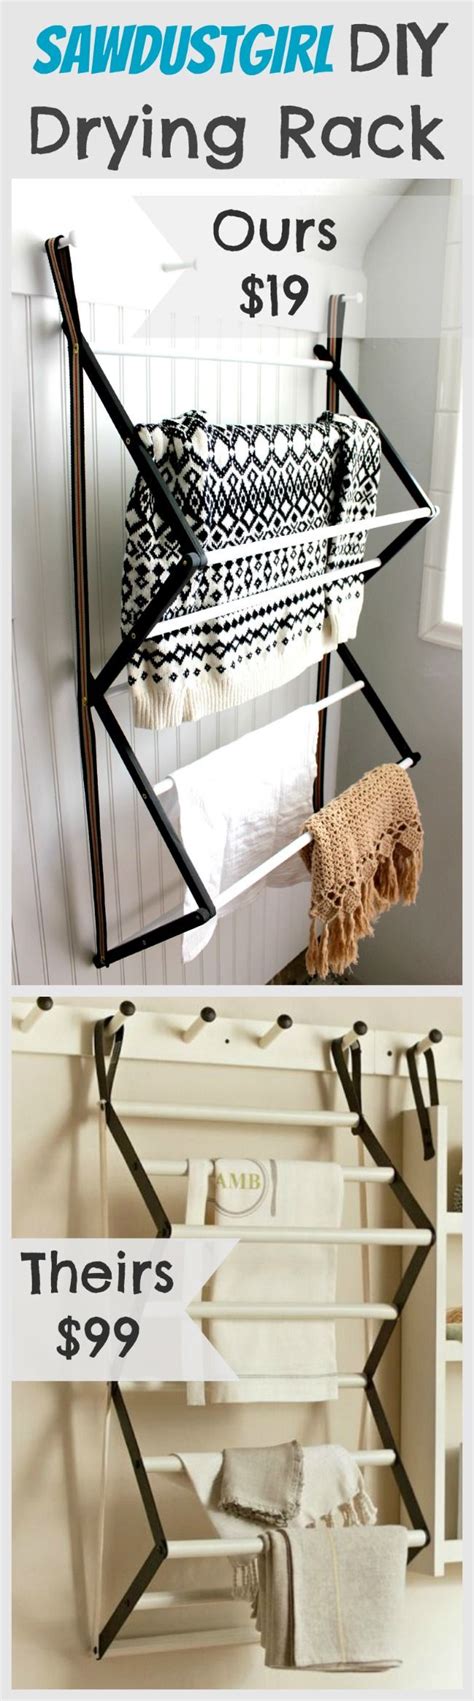 The wall mounted clothes drying racks are so much nicer: Diy Laundry Drying Rack - WoodWorking Projects & Plans